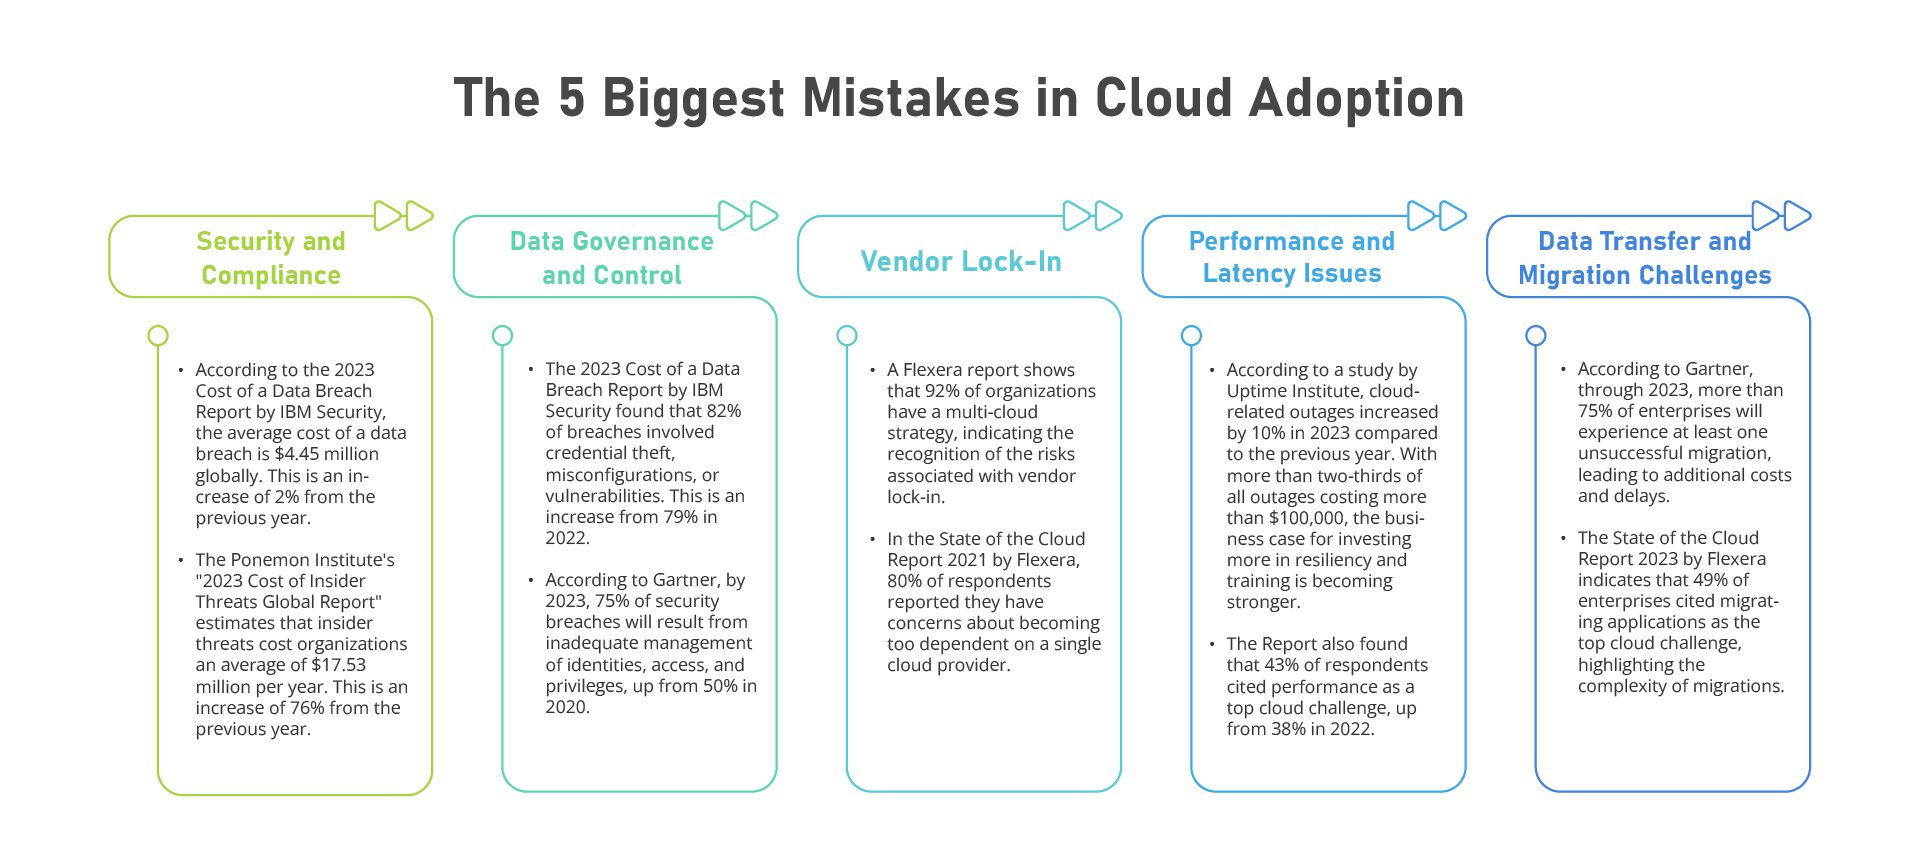 The 5 Biggest Mistakes in Cloud Adoption